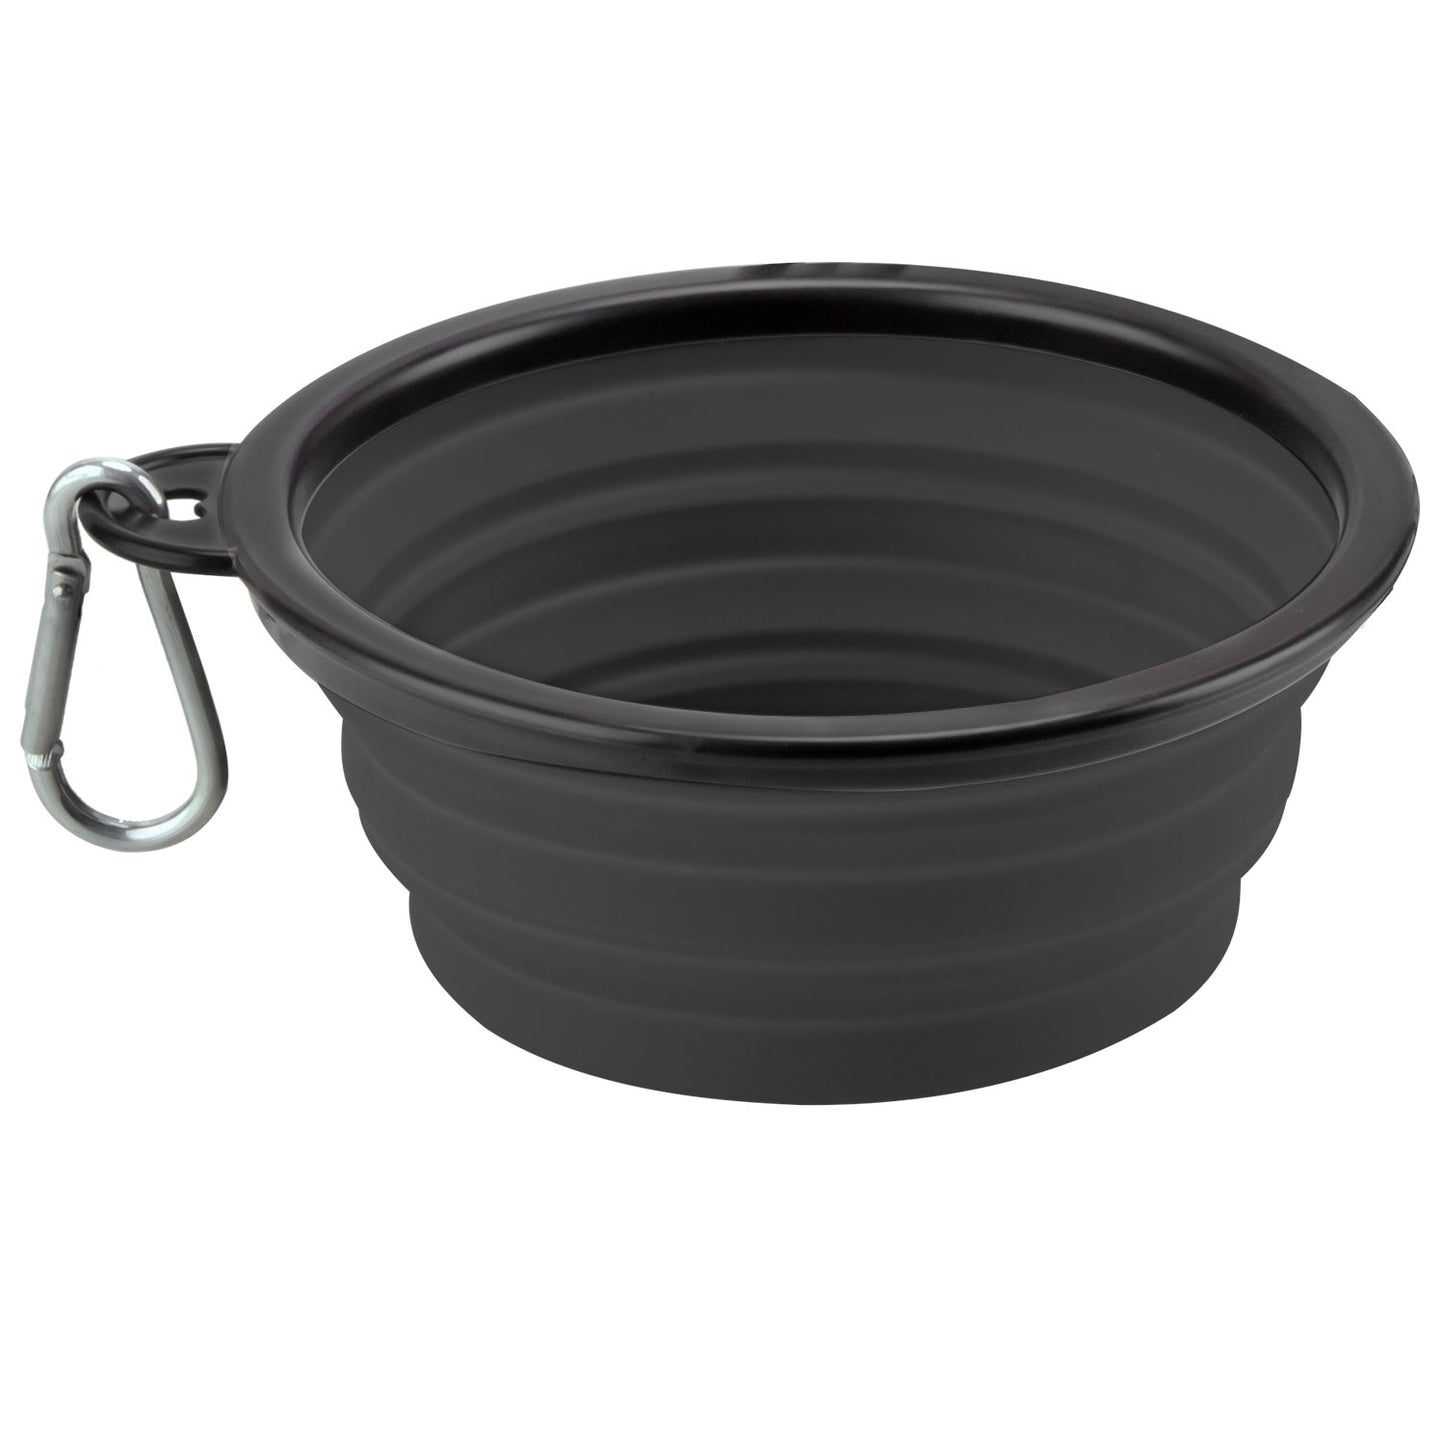 Collapsible Dog Bowls for Outdoor Travel